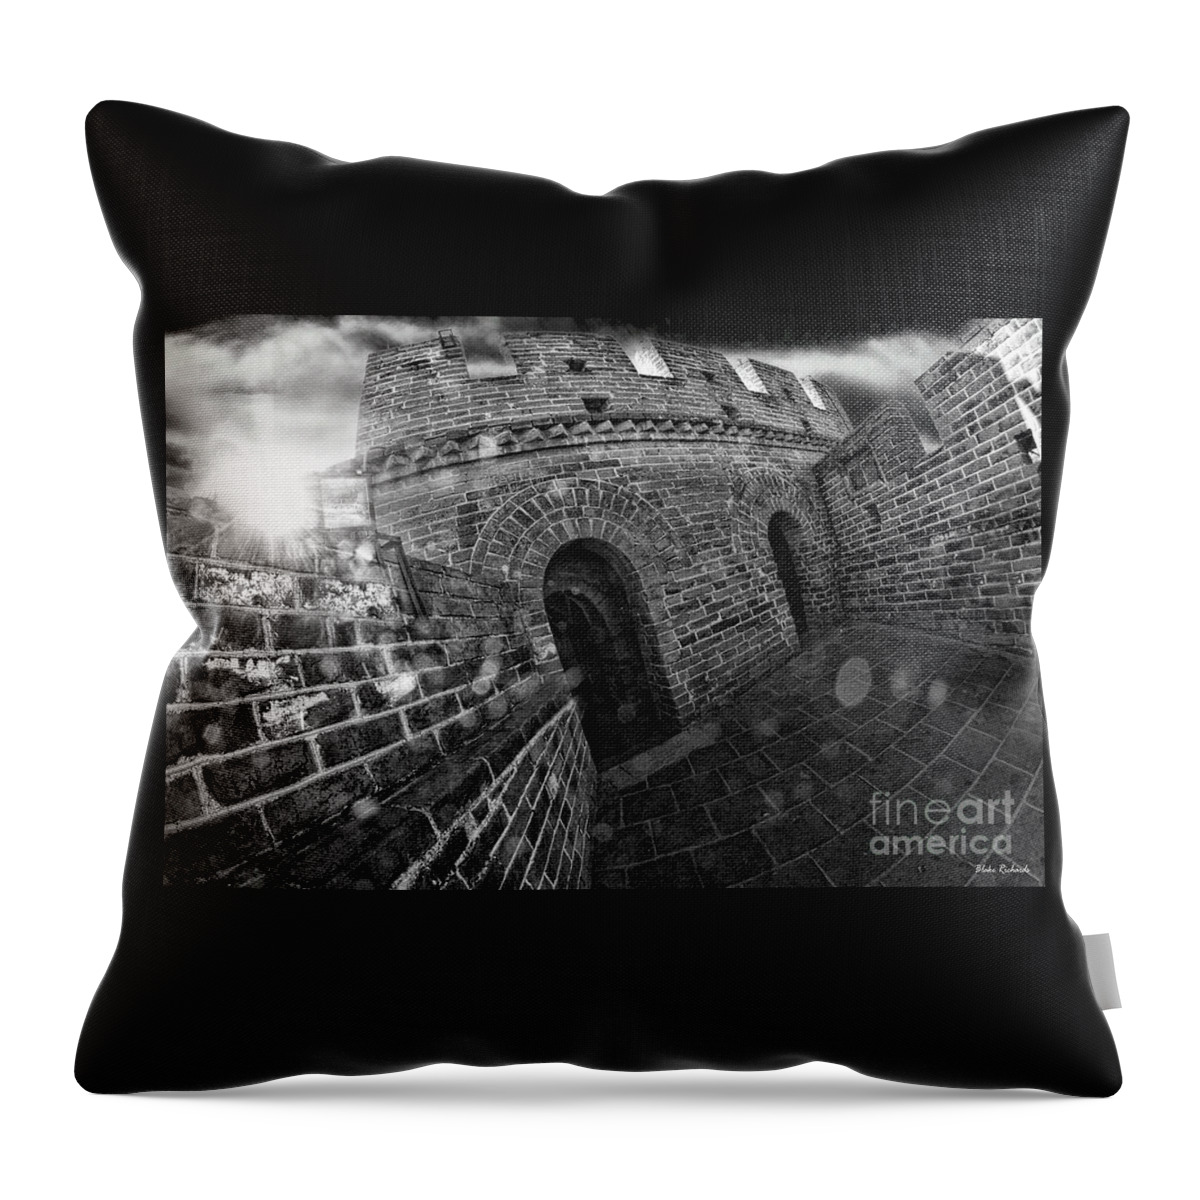  Throw Pillow featuring the photograph Sunrise On Top Of The Great Wall China by Blake Richards